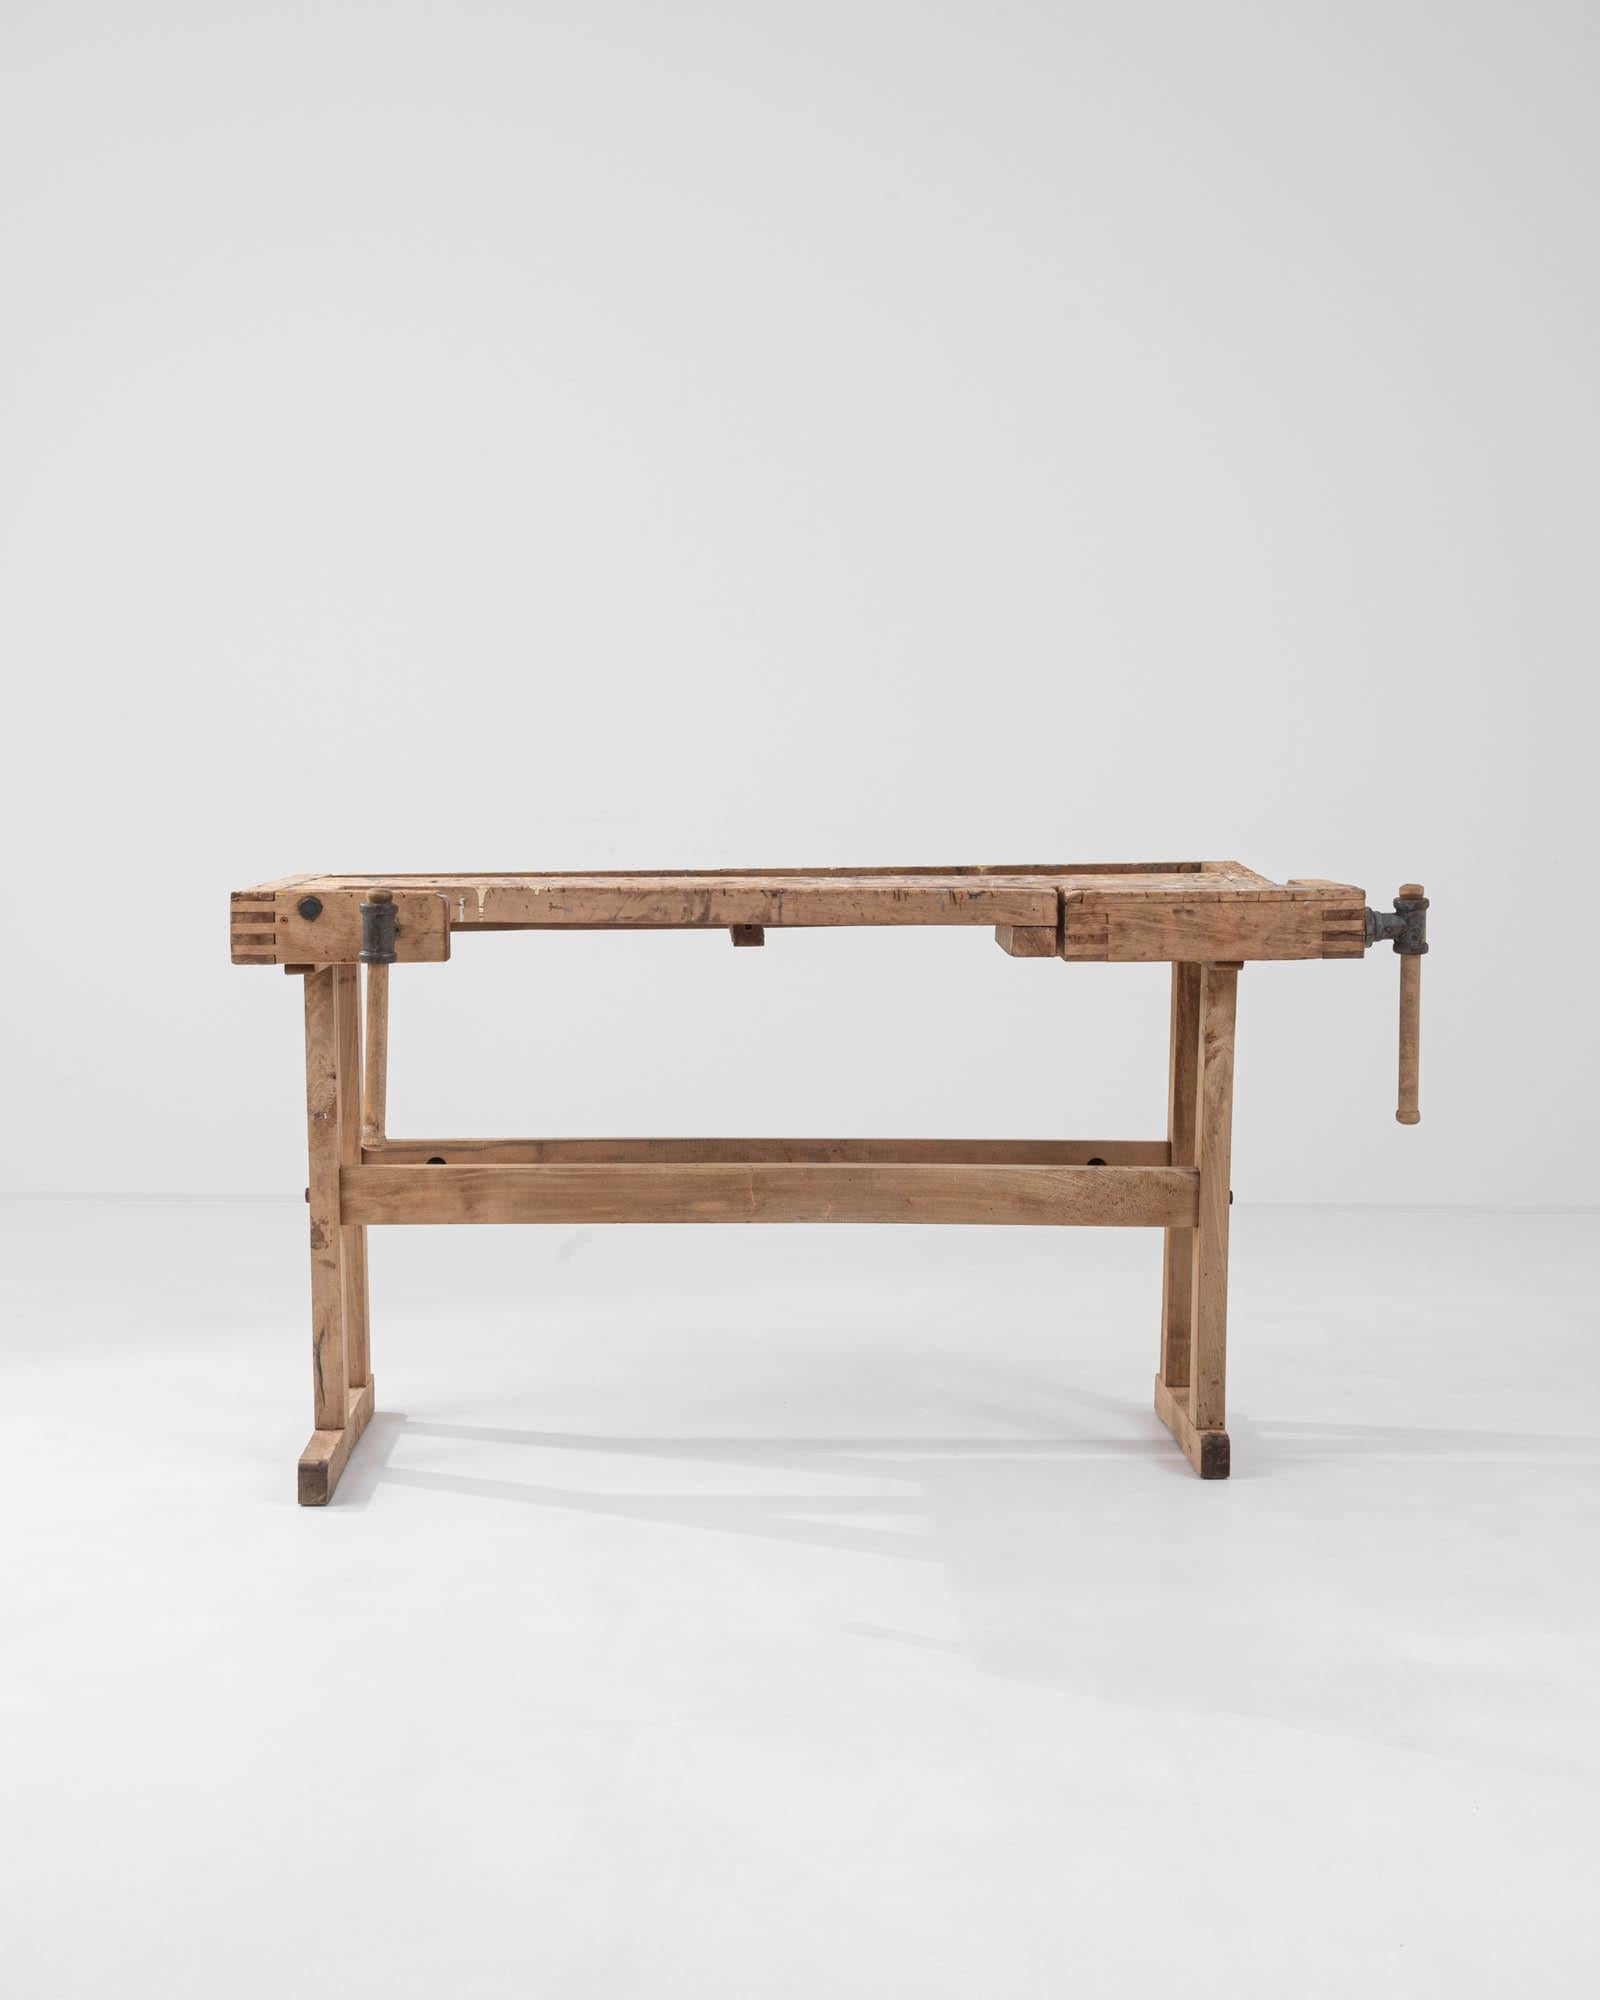 A vintage Central European wooden work table. Constructed from stout wooden beams, crafted with the owner’s livelihood in mind. This ultimate sturdy table’s newest craft is turning function into style. Worn and loved, the details in its